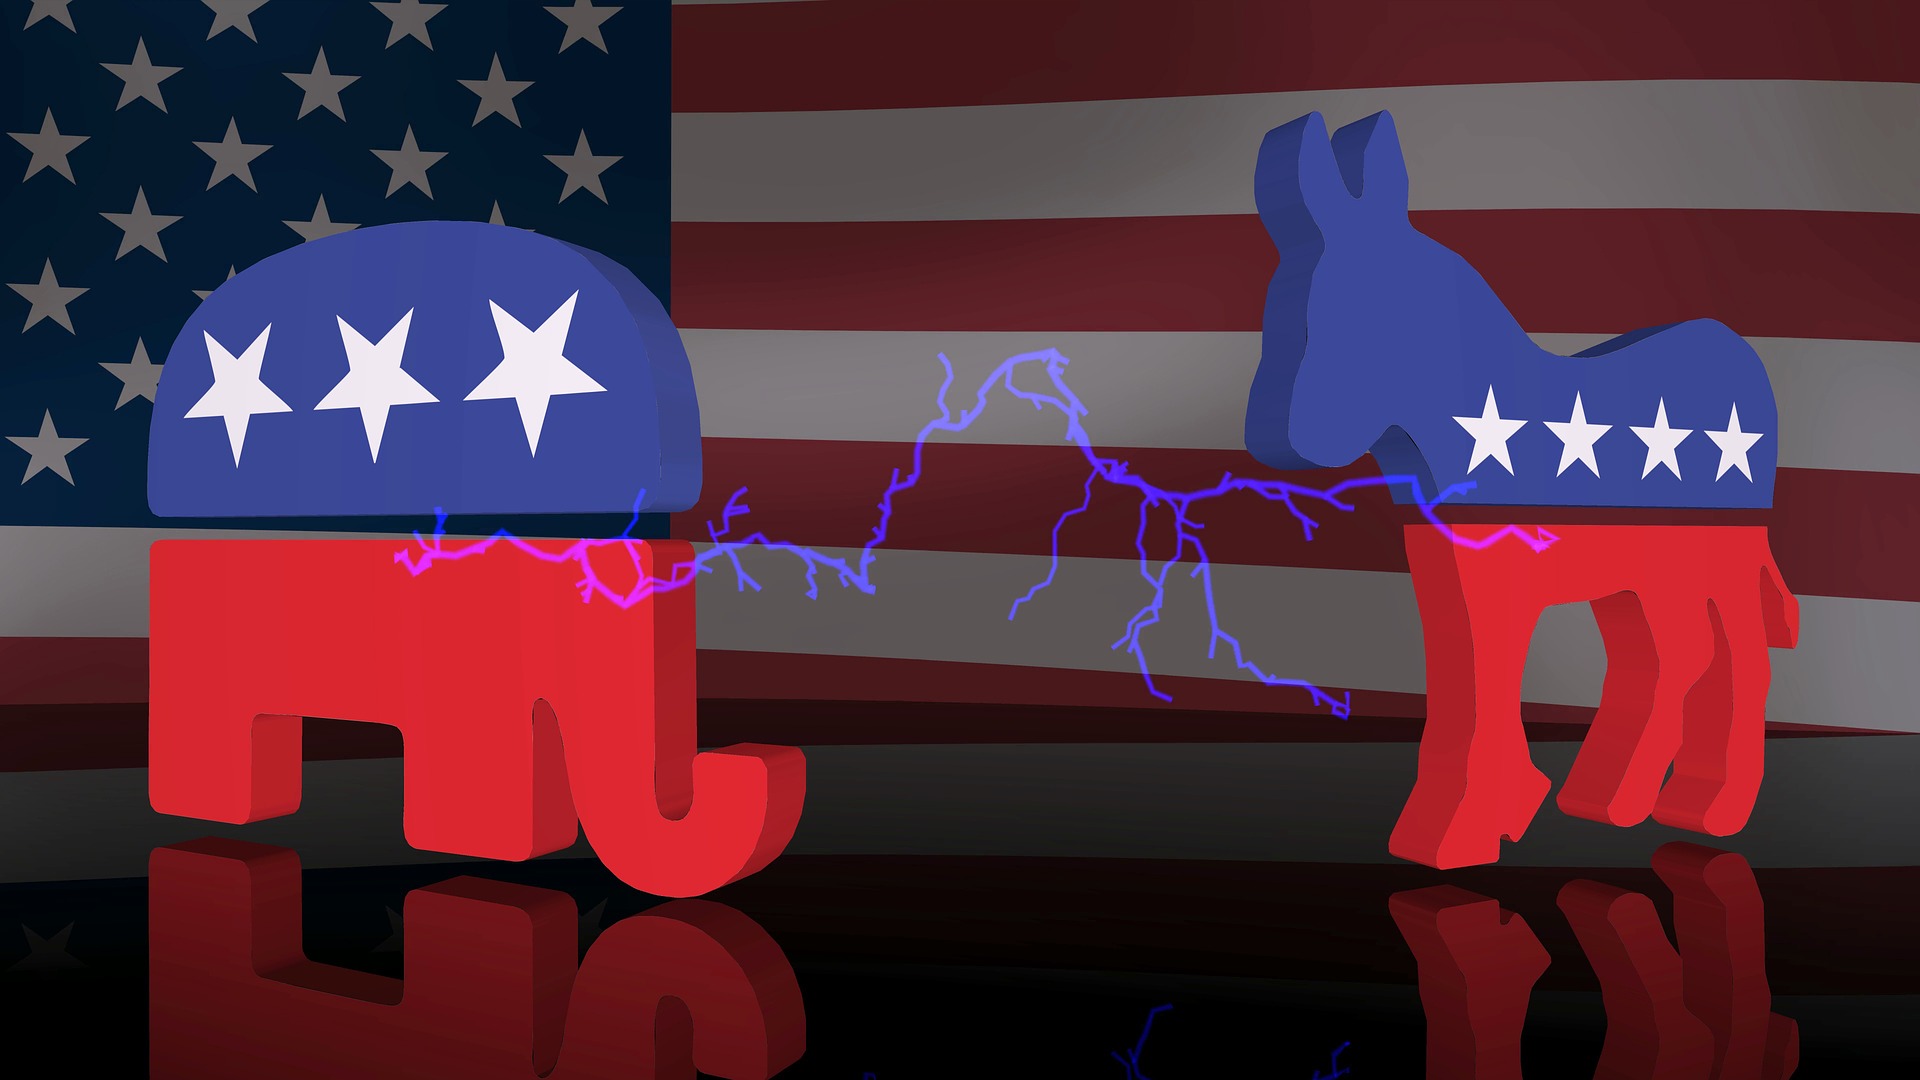 The Economist’s midterm election model shows Republicans have a 74% chance of winning the House; Democrats have a 78% chance of retaining the Senate